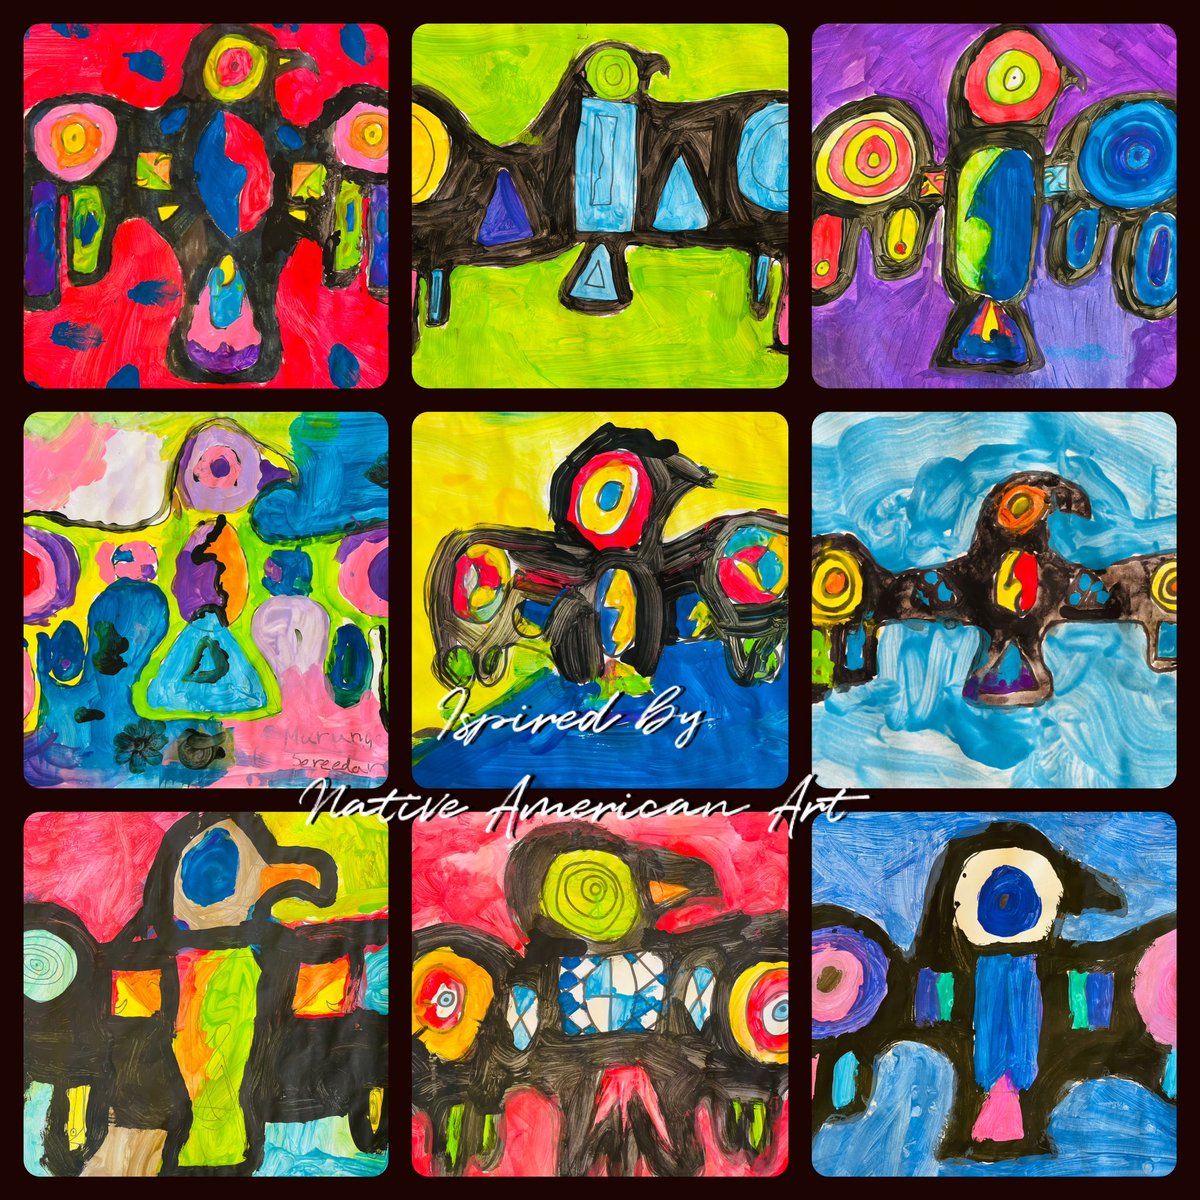 3rd grade artists had a great time learning about <a target='_blank' href='http://twitter.com/NorvalMofficial'>@NorvalMofficial</a> and creating their own version of a raven.<a target='_blank' href='http://twitter.com/APS_ATS'>@APS_ATS</a> <a target='_blank' href='http://twitter.com/APSArts'>@APSArts</a> <a target='_blank' href='https://t.co/V8ObpcqJdZ'>https://t.co/V8ObpcqJdZ</a>